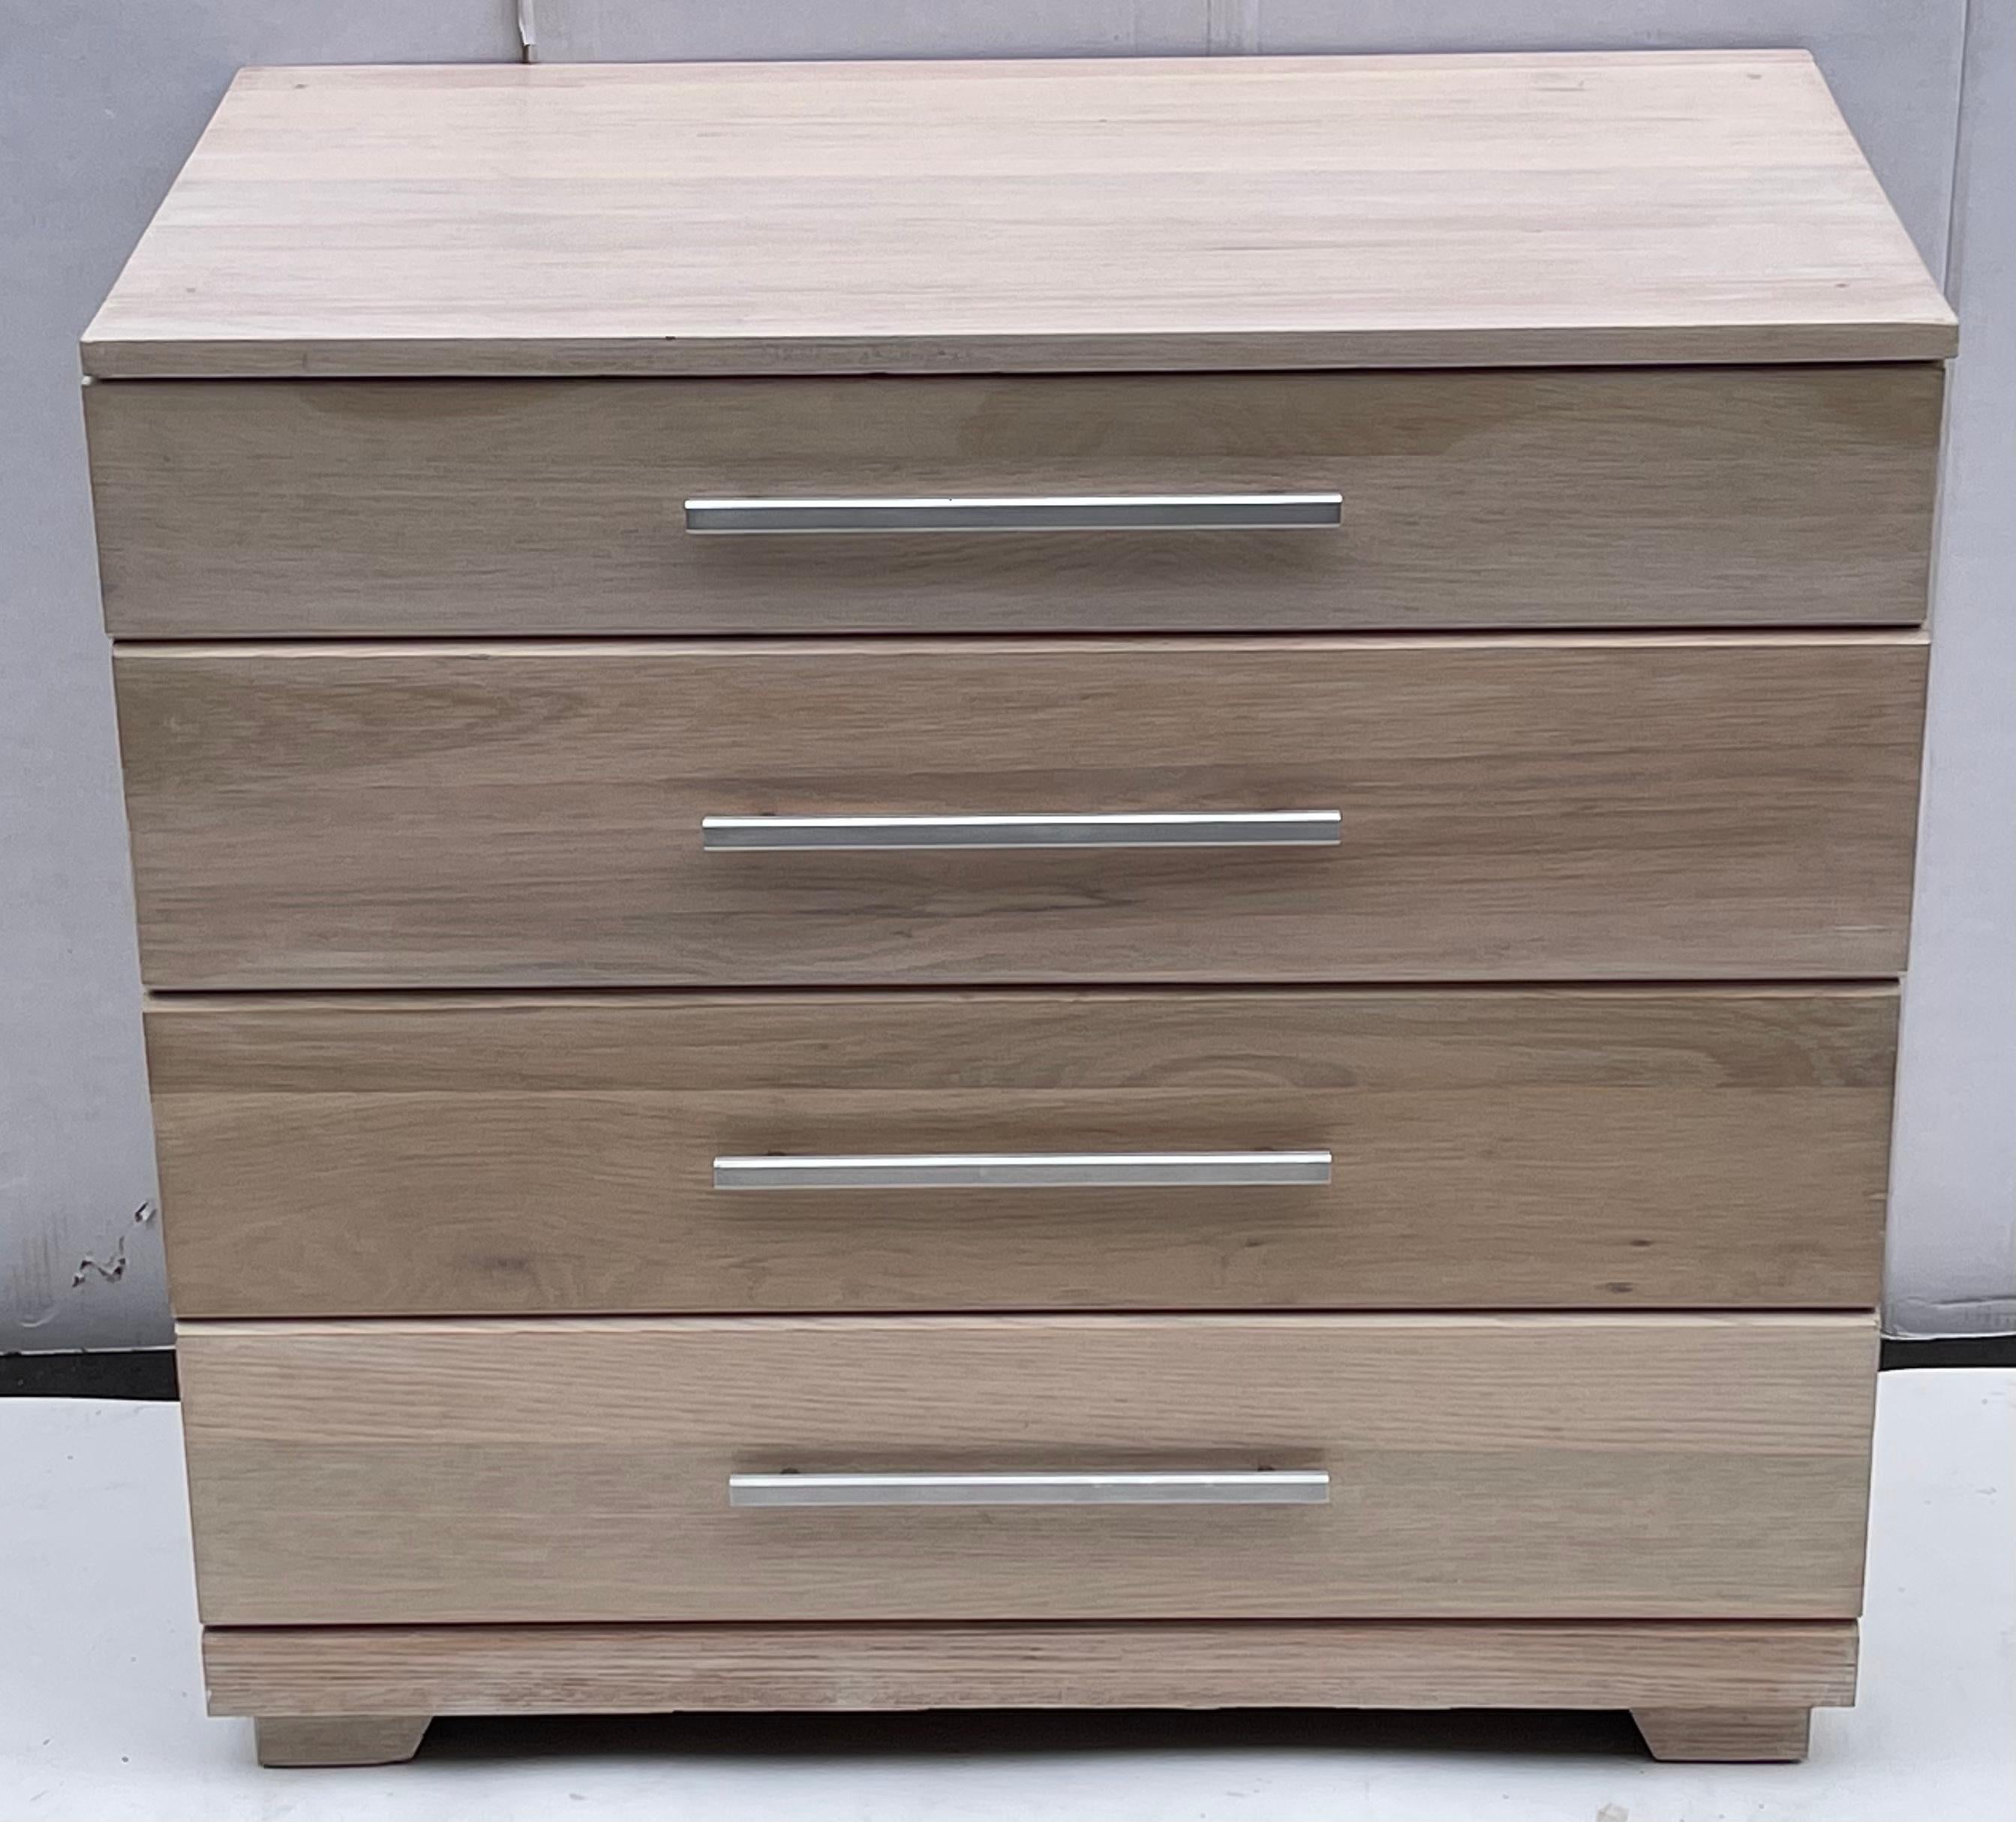 These are great all around with a modern form and cerused finish, they pack a decorating punch! This is a pair of bachelor’s chest designed by Raymond Loewy for Mengel Furniture. They have a clean cerused finish with a plank style construction. They